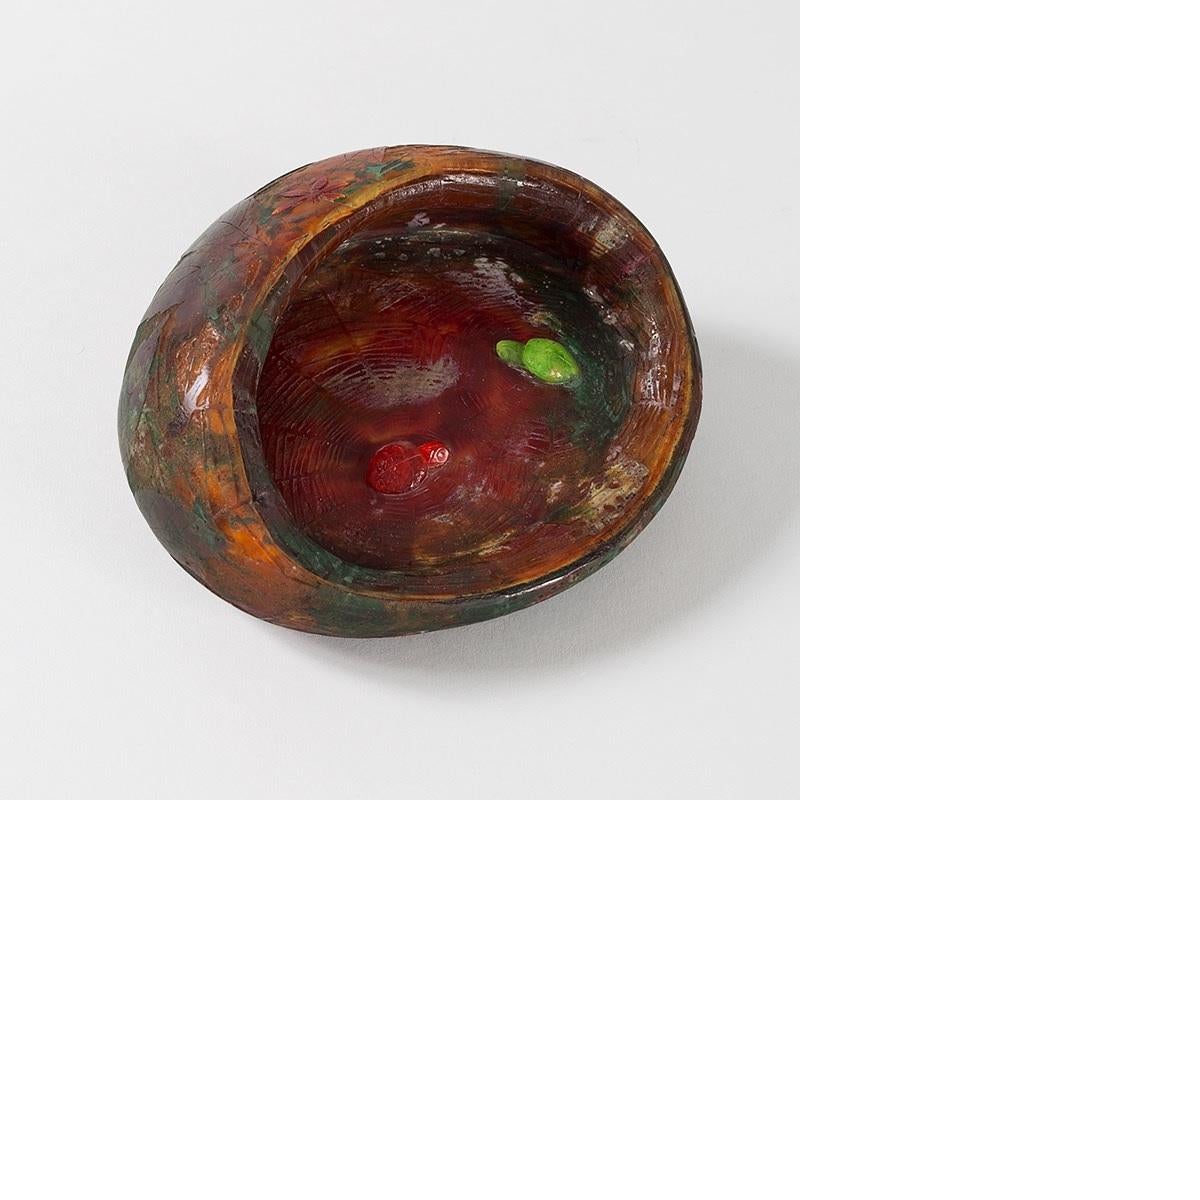 A French Art Nouveau wheel carved glass vide poche with elements of silver foil by Daum. The exterior of the vide poche has a red dragonfly floating over carved red and green leaves, with an orange background. The interior has one red and one green